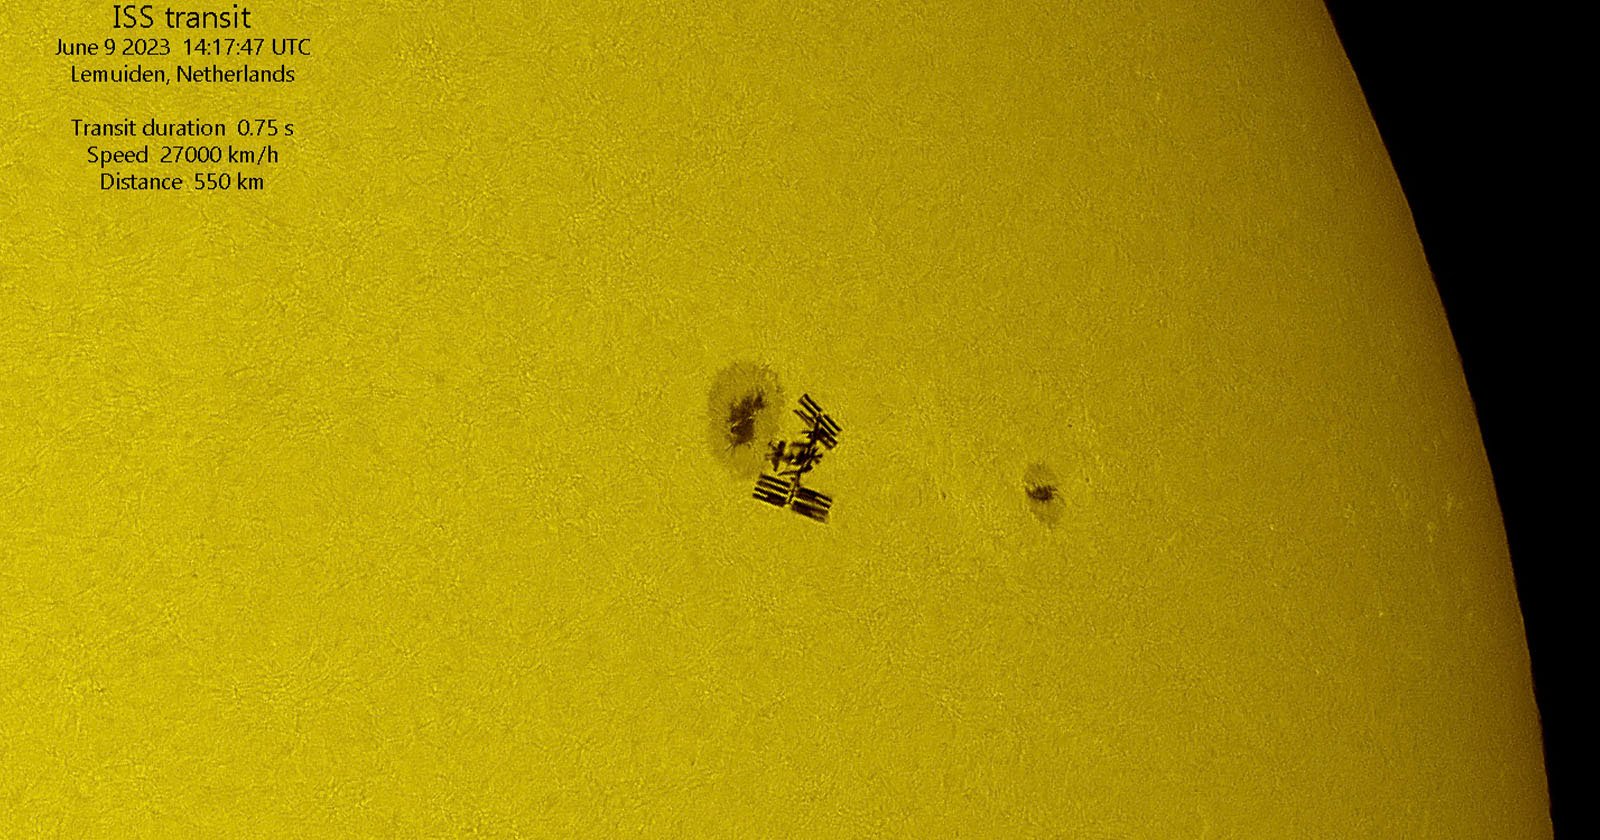 A photographer captures the International Space Station crossing the sun during an astronaut’s spacewalk